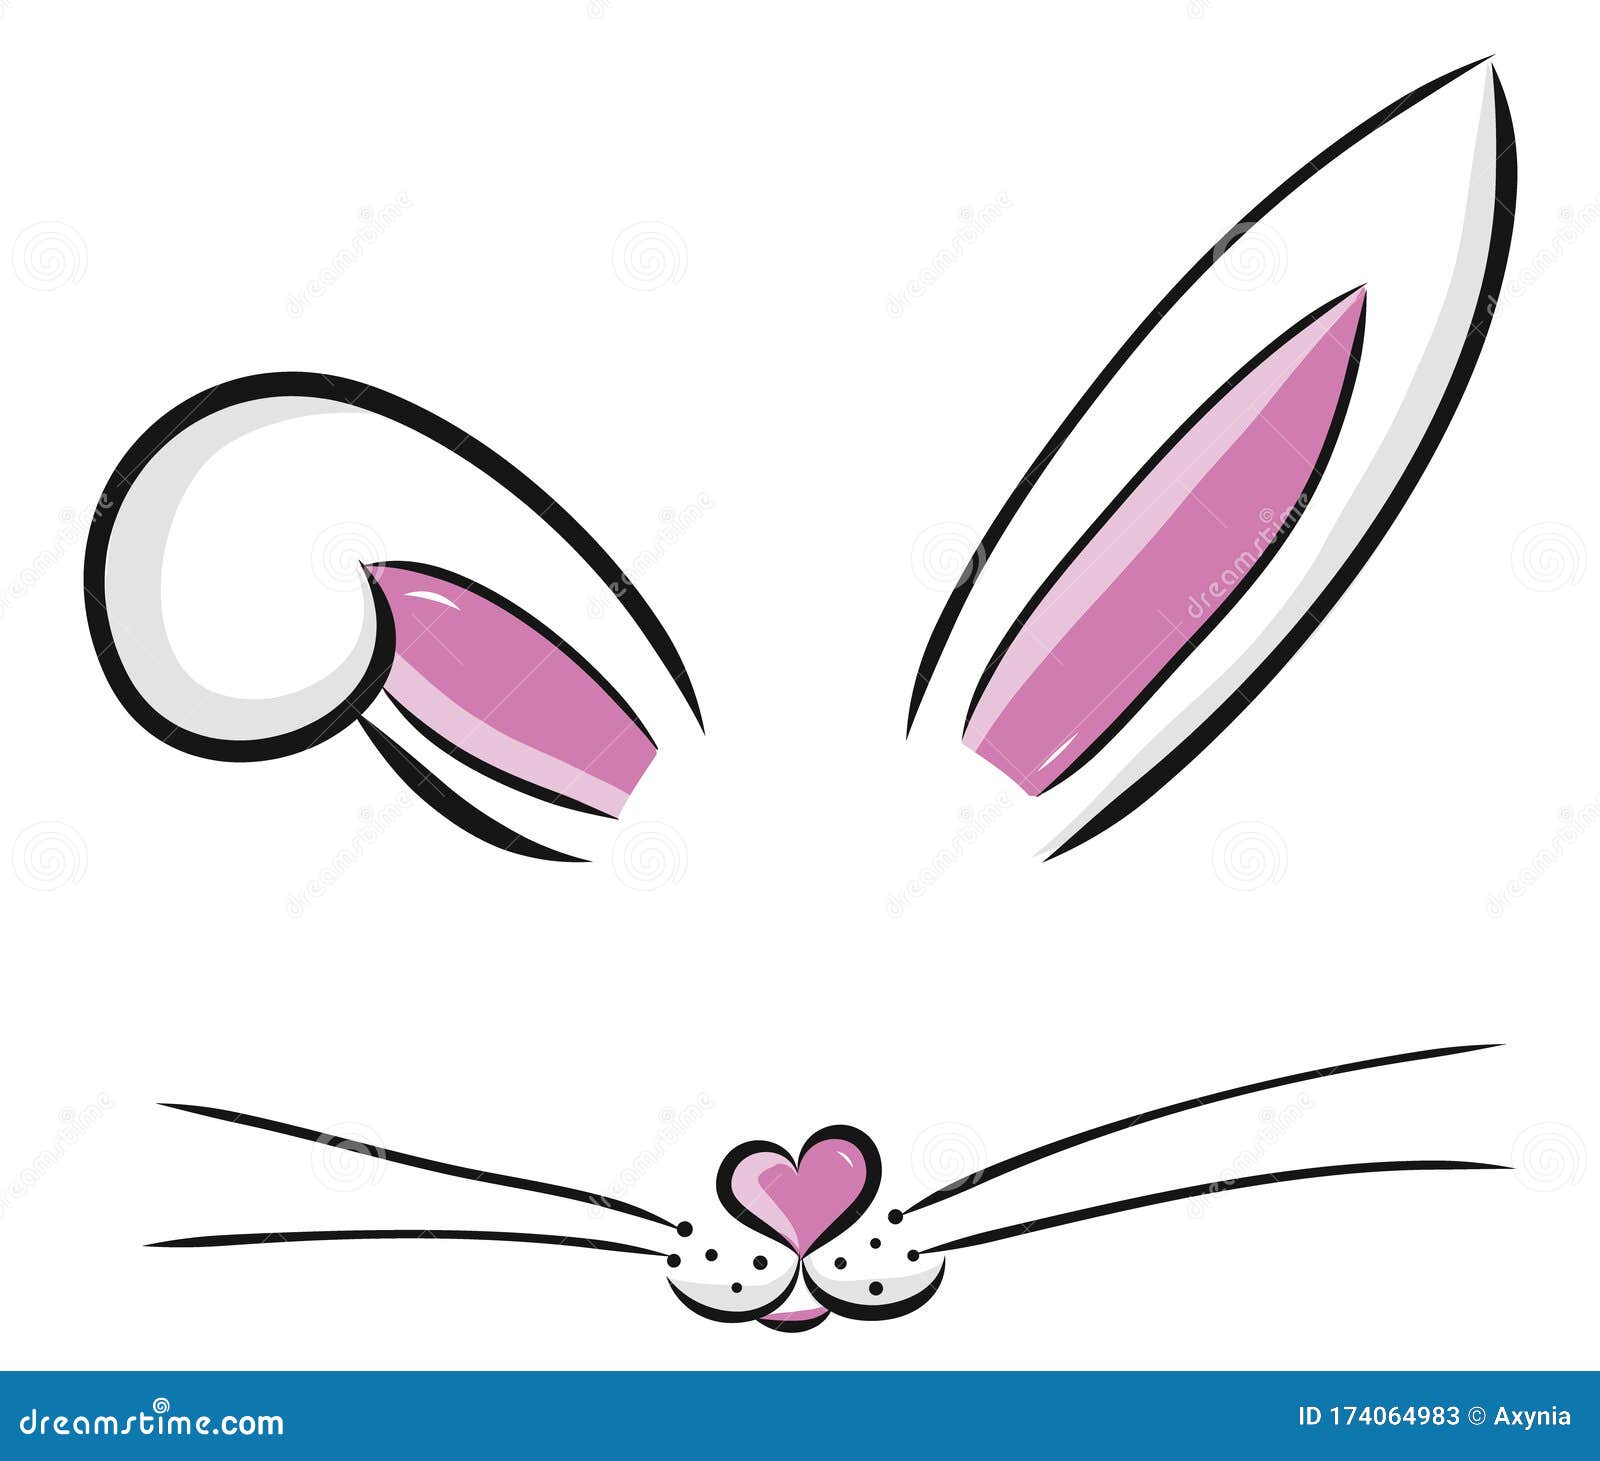 easter bunny cute   drawn by hand. bunny face, ears and tiny muzzle with whiskers  on white